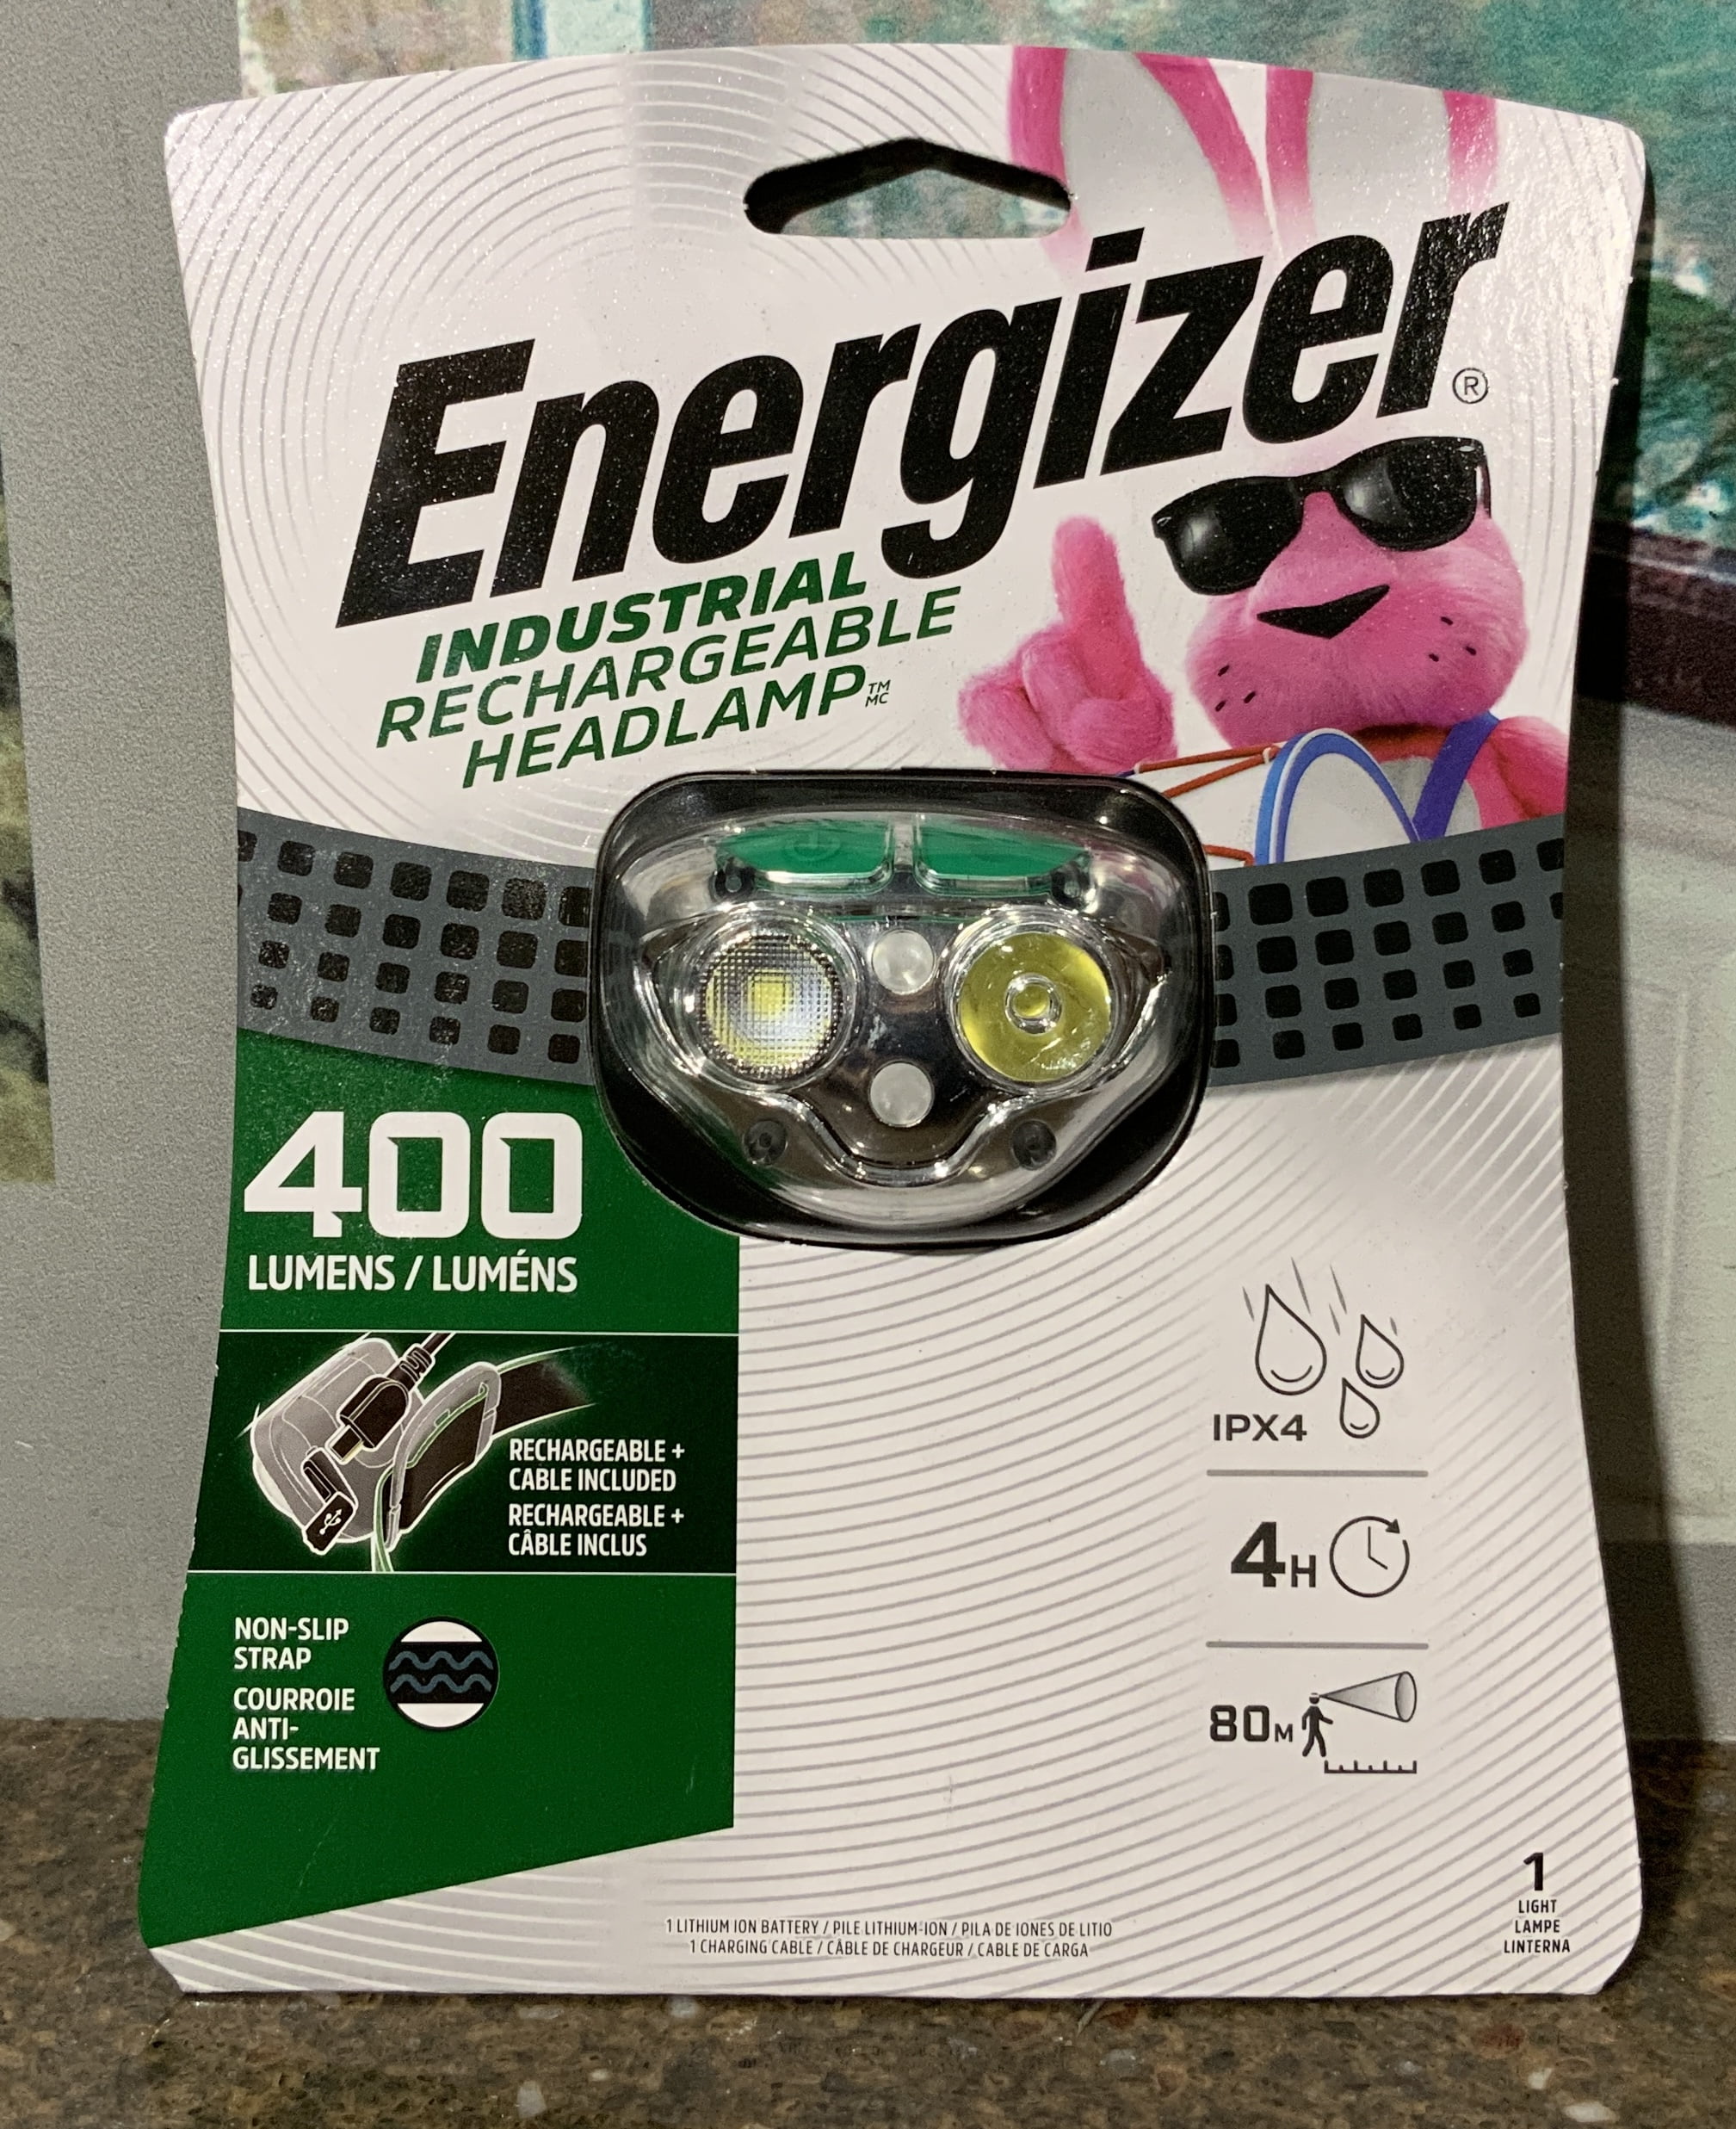 Industrial 4 Energizer IPX4 Hour 400 Visibility Lumens Rechargeable Headlamp 80m